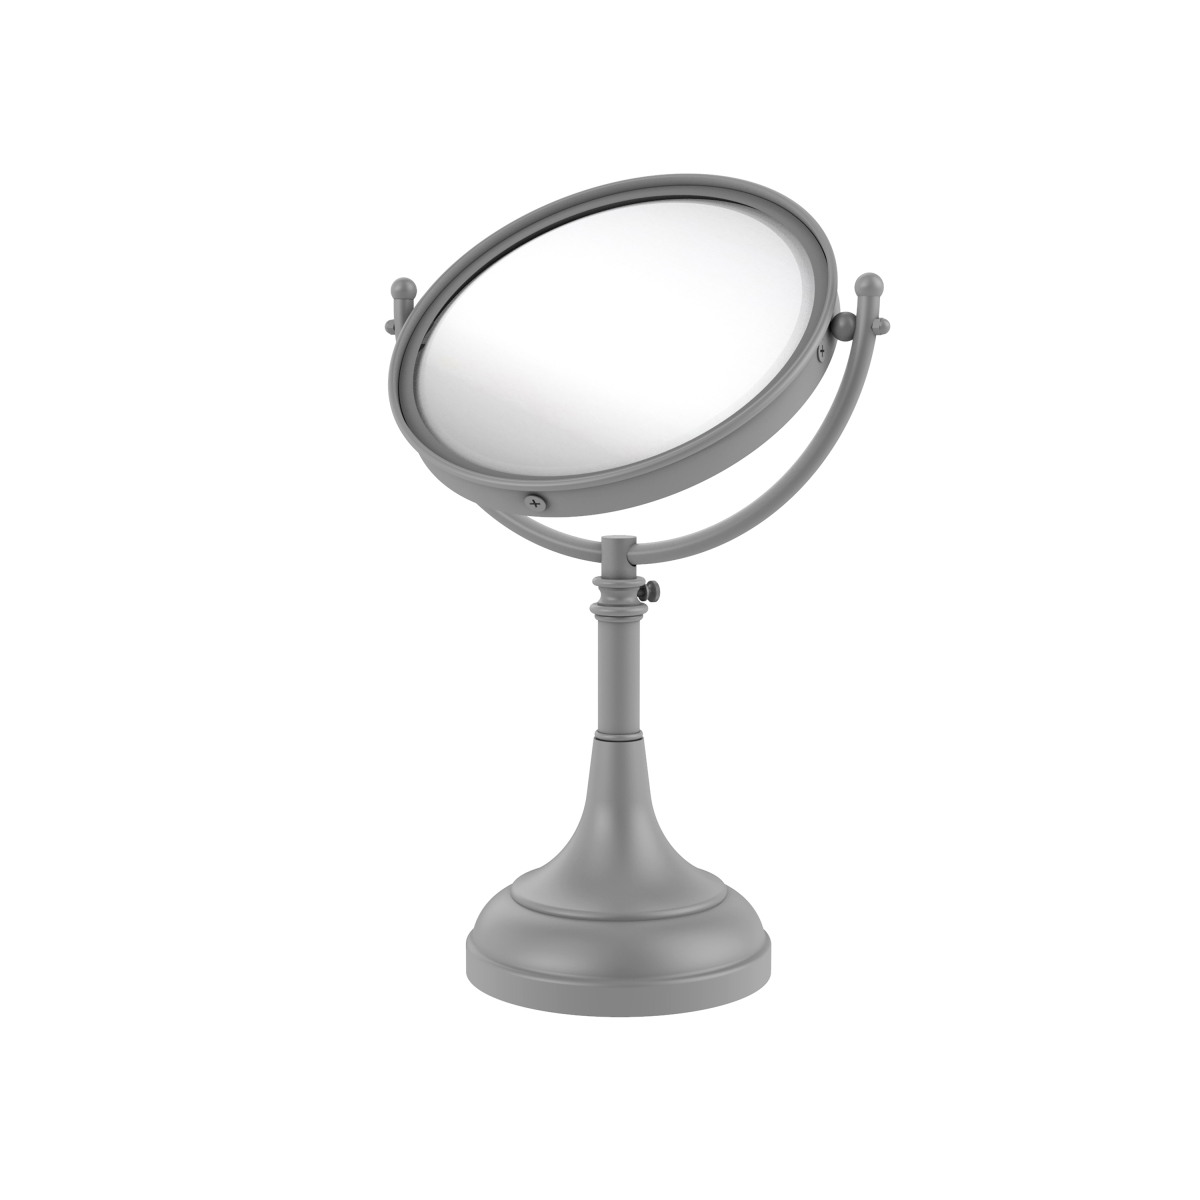 Picture of Allied Brass DM-1-3X-GYM 8 in. Height Adjustable Vanity Top Make-Up Mirror 3X Magnification, Matte Gray